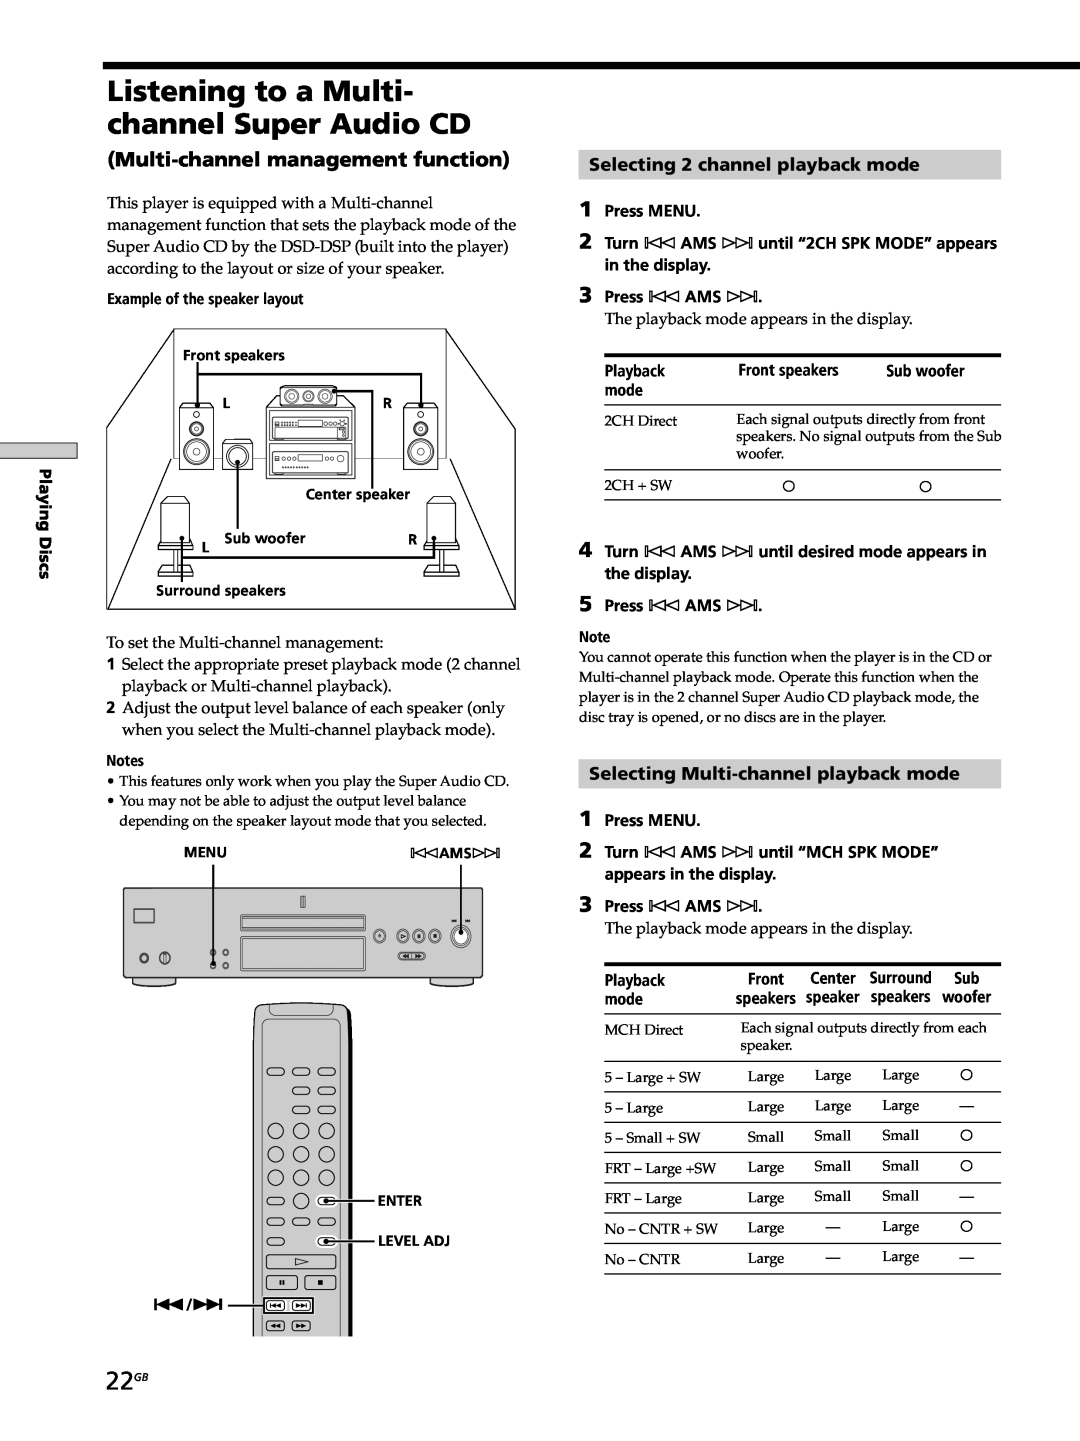 Sony SCD-XB770 operating instructions Listening to a Multi- channel Super Audio CD, 22GB, Multi-channelmanagement function 